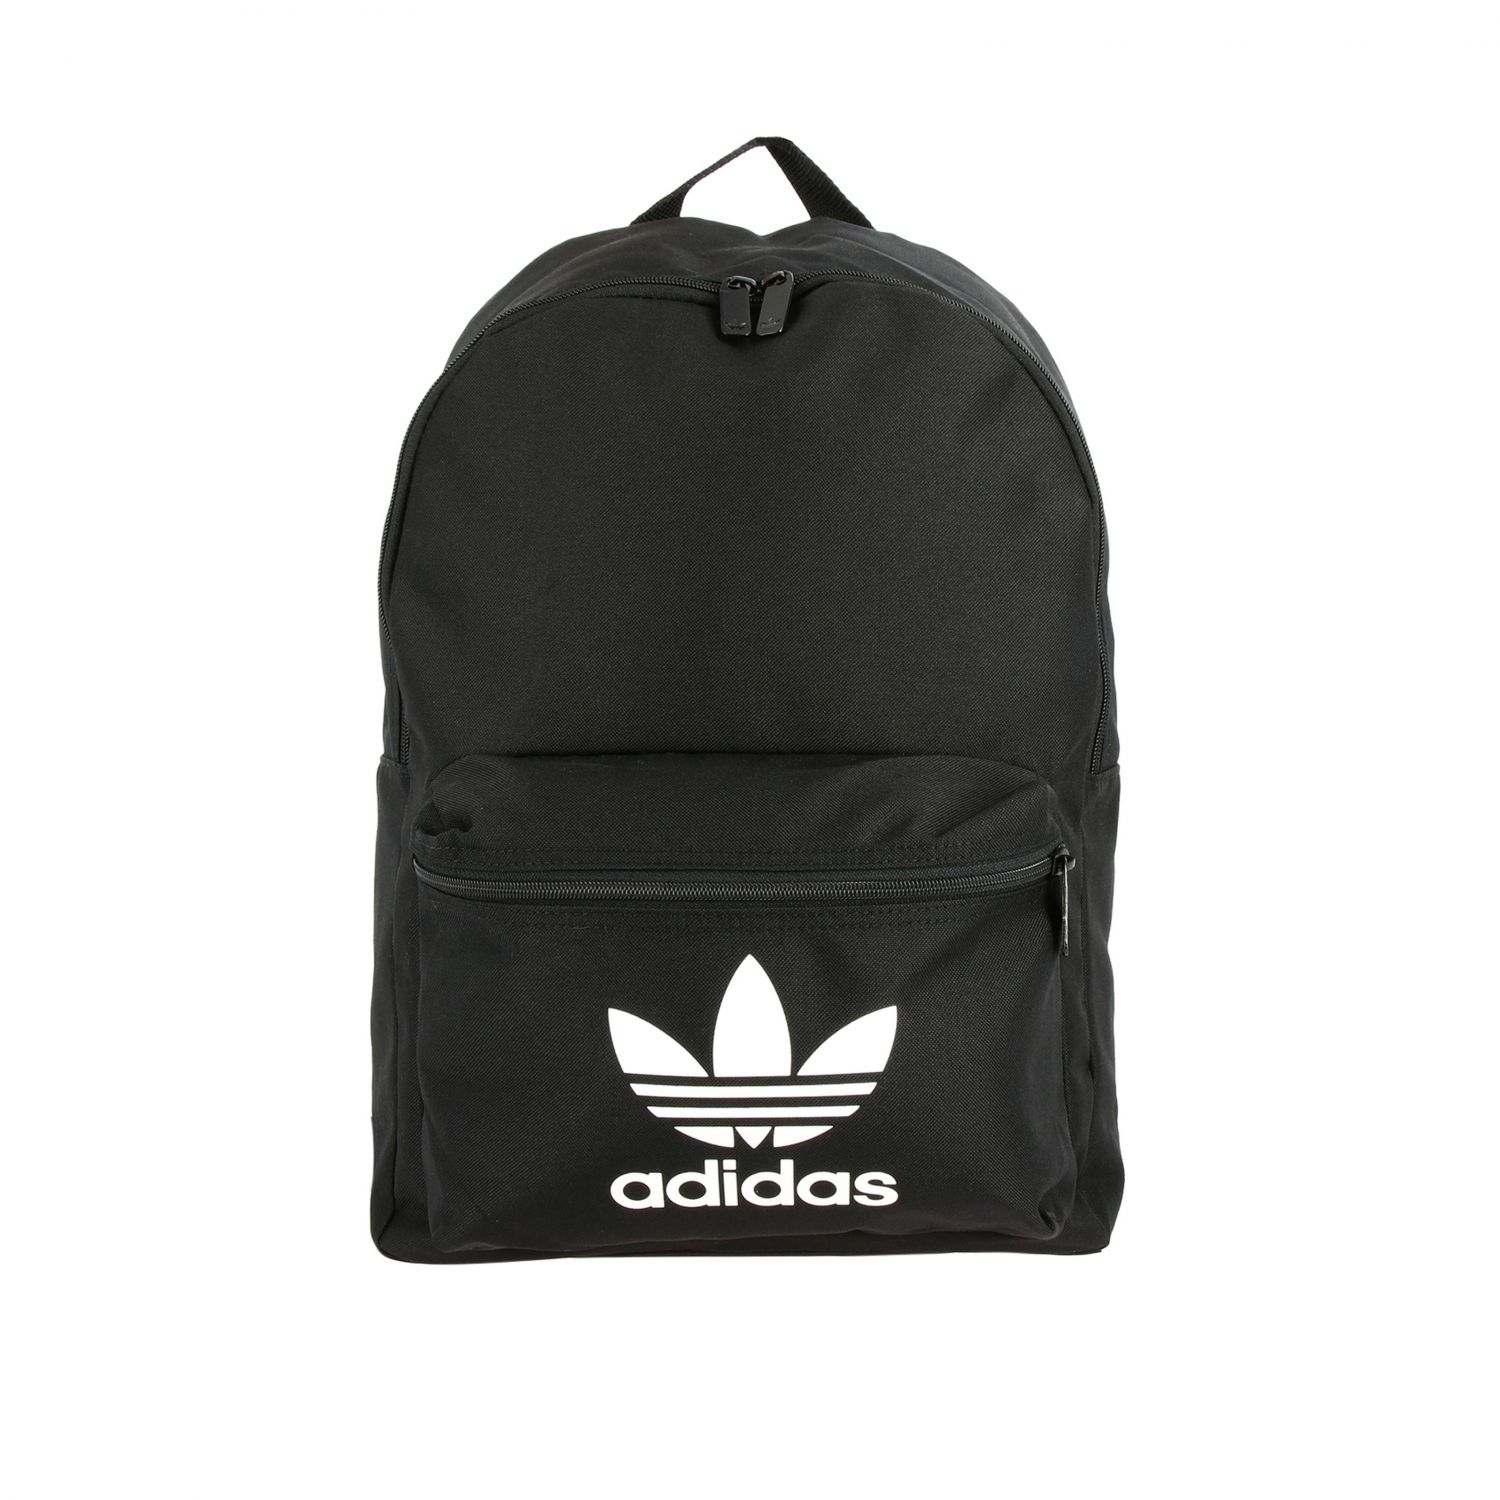 Adidas Originals Outlet: By Pharrell Williams canvas backpack with ...